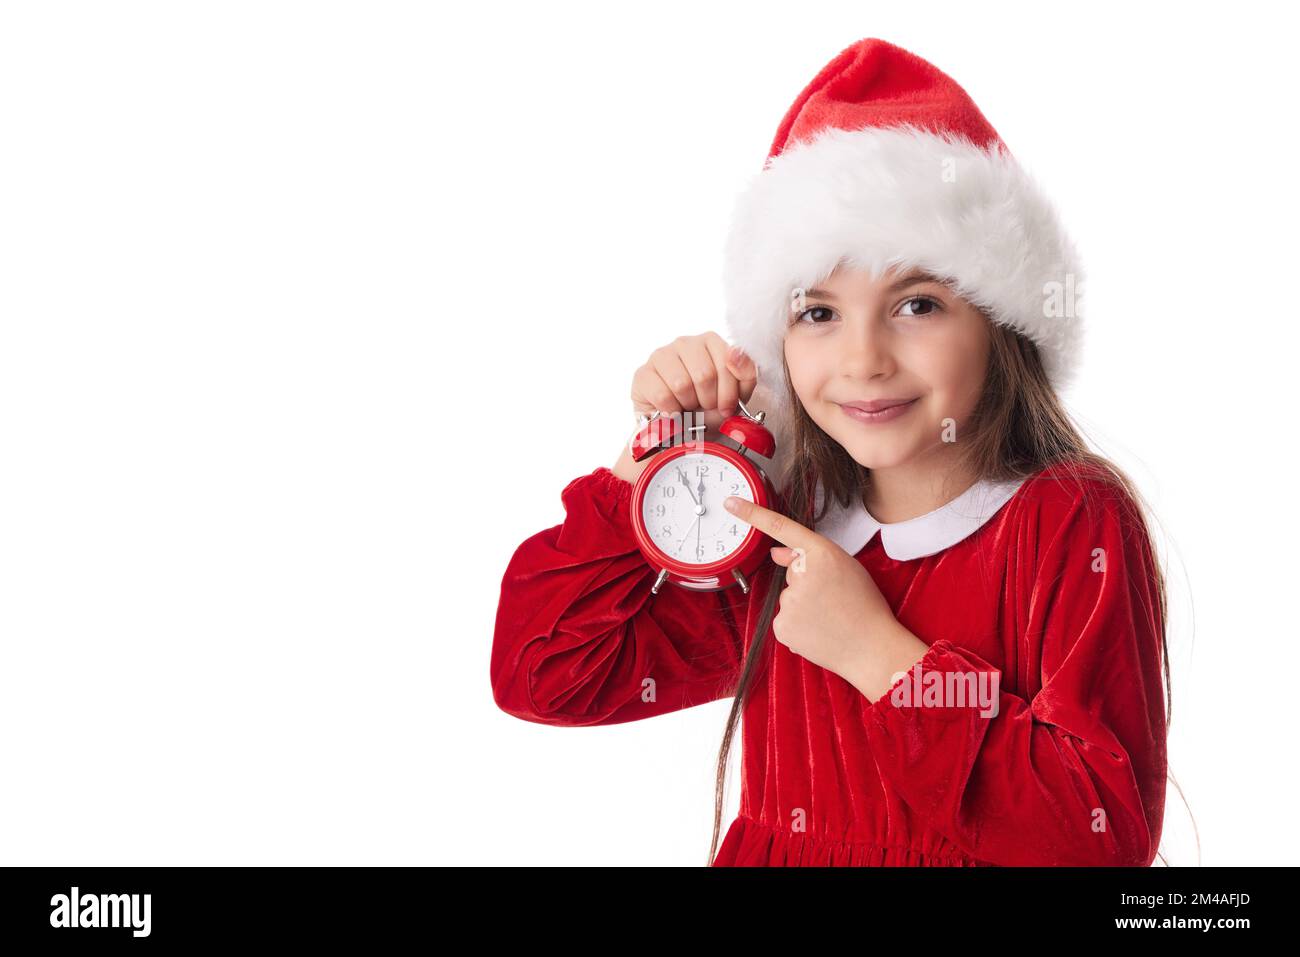 Christmas woman with red alarm clock, smiling girl in red Santa claus dress posing on white background Stock Photo